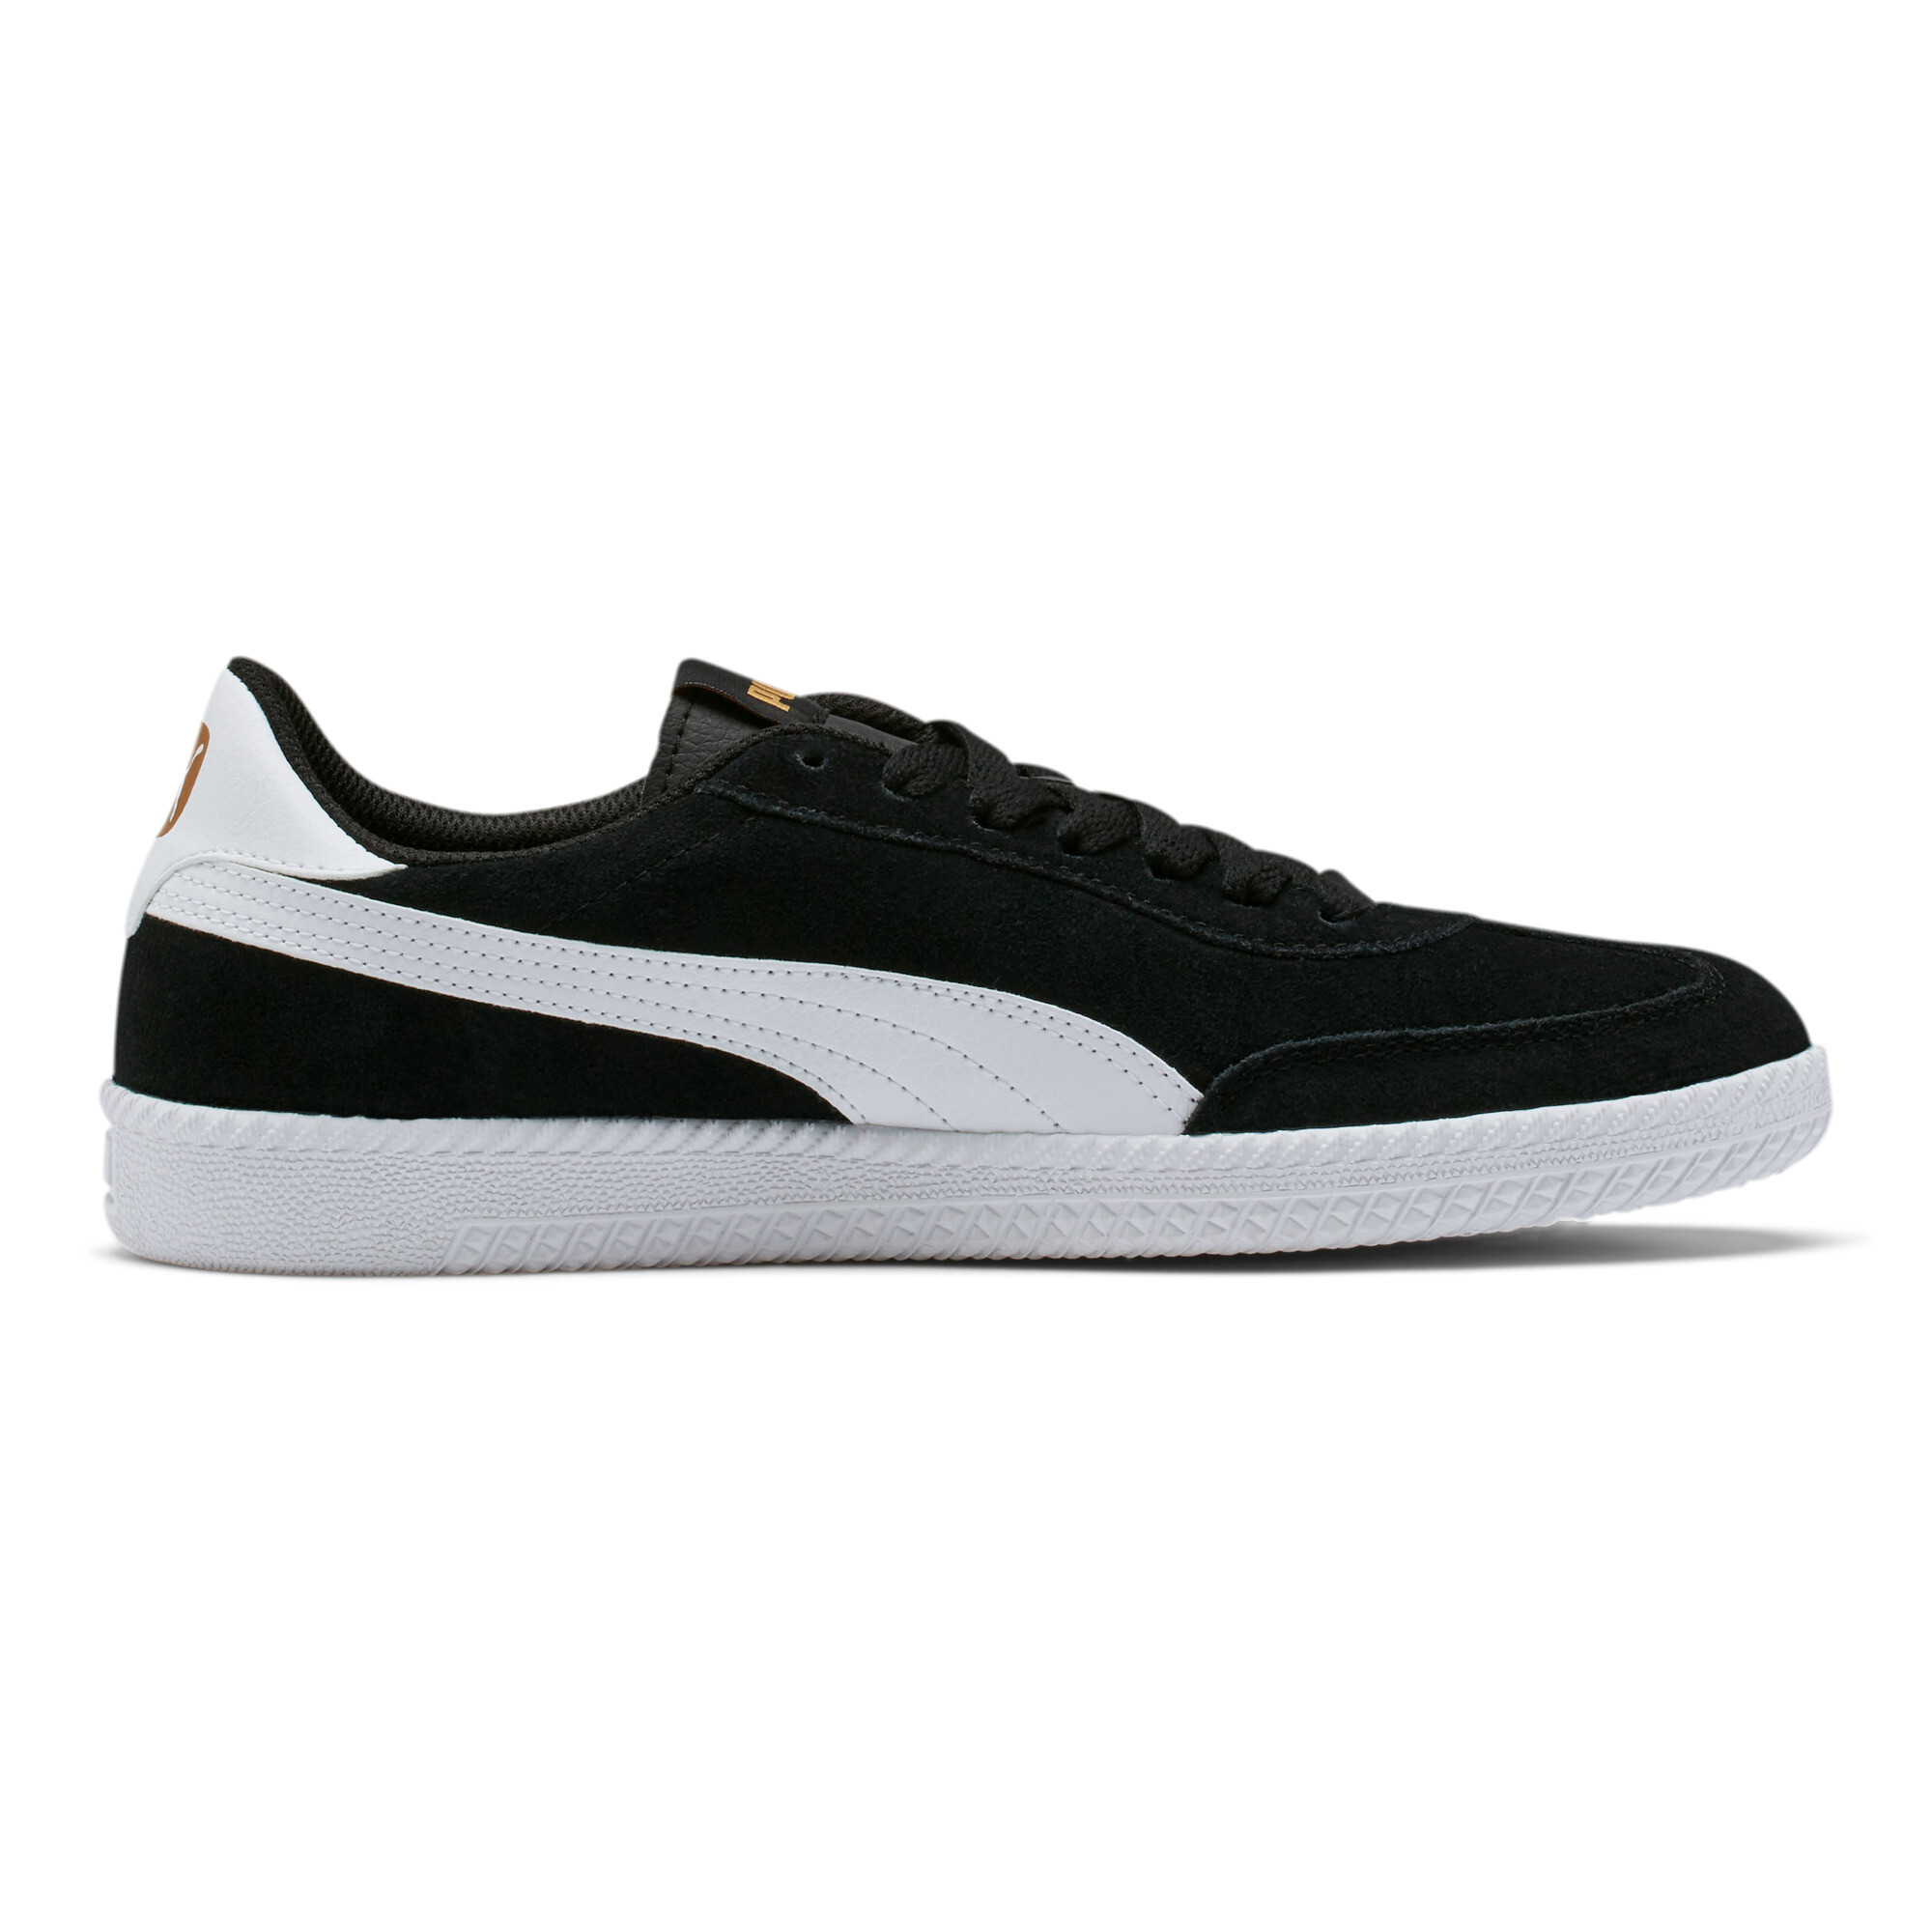 astro cup suede sneakers